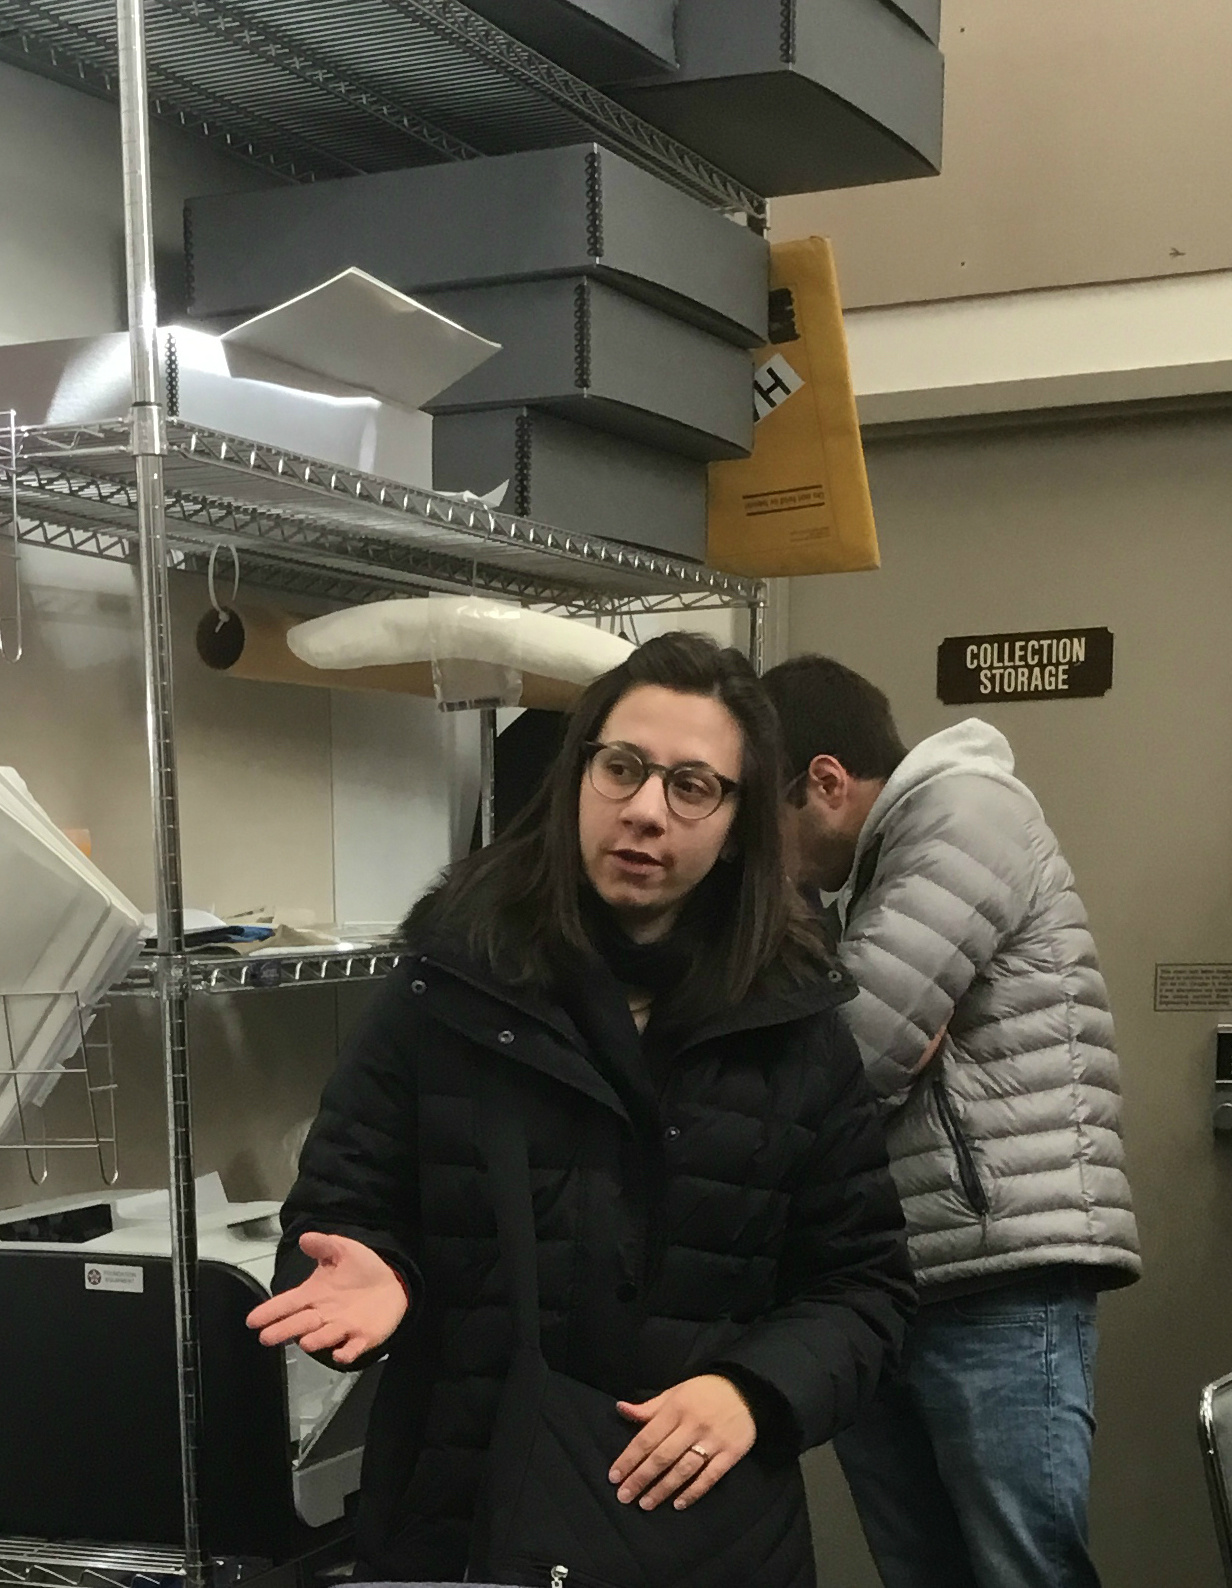 This is a photograph of me standing an gesturing with my right hand. There is a student (face obscured) standing behind me. I am in front of a large metal shelf that contains gray archival boxes.